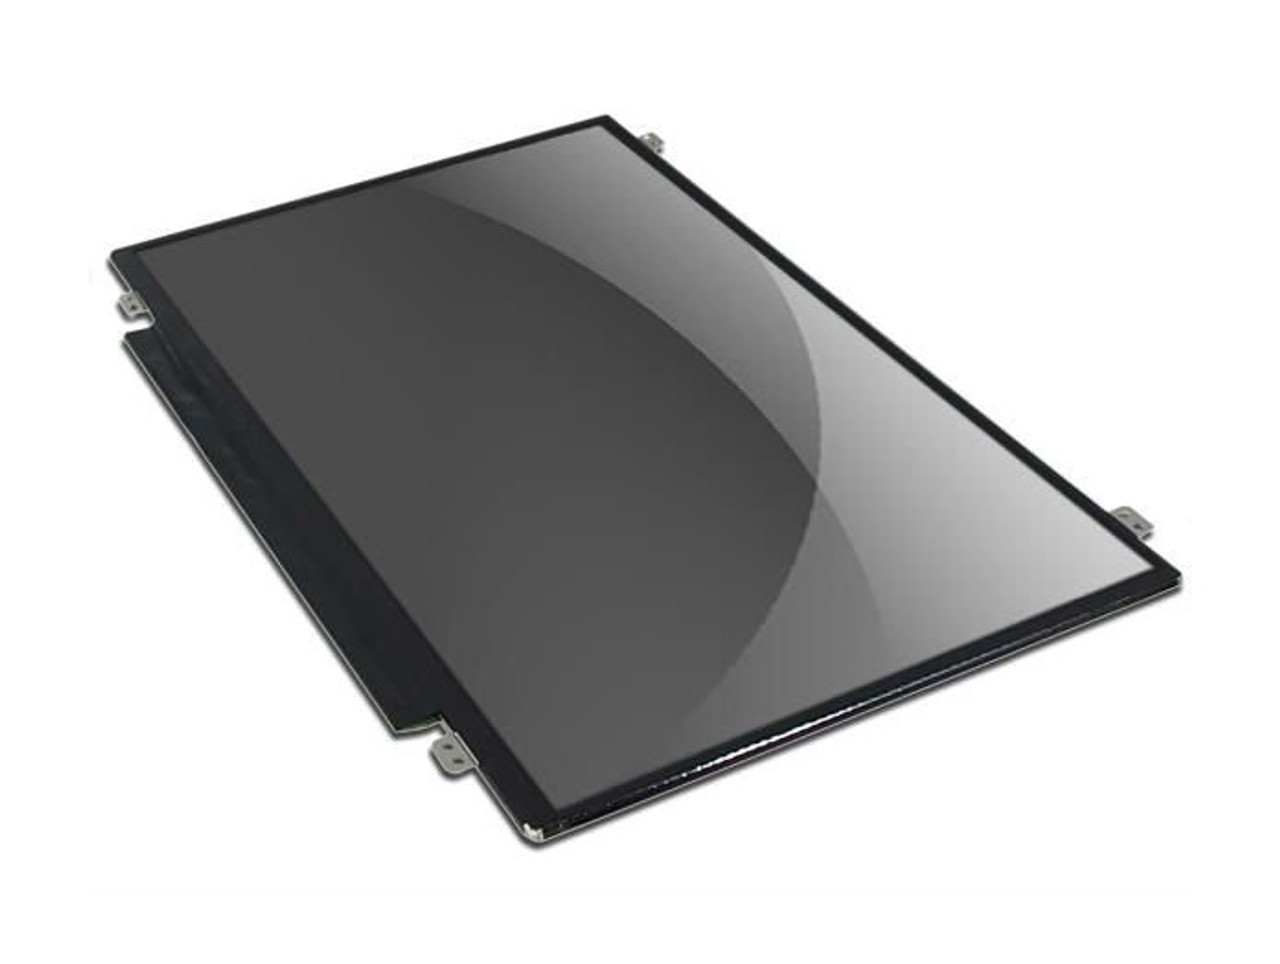 RV7VR - Dell 15.6-inch FHD LED Glossy LCD Panel with Cover and Hinge for Inspiron 15r (Refurbished)